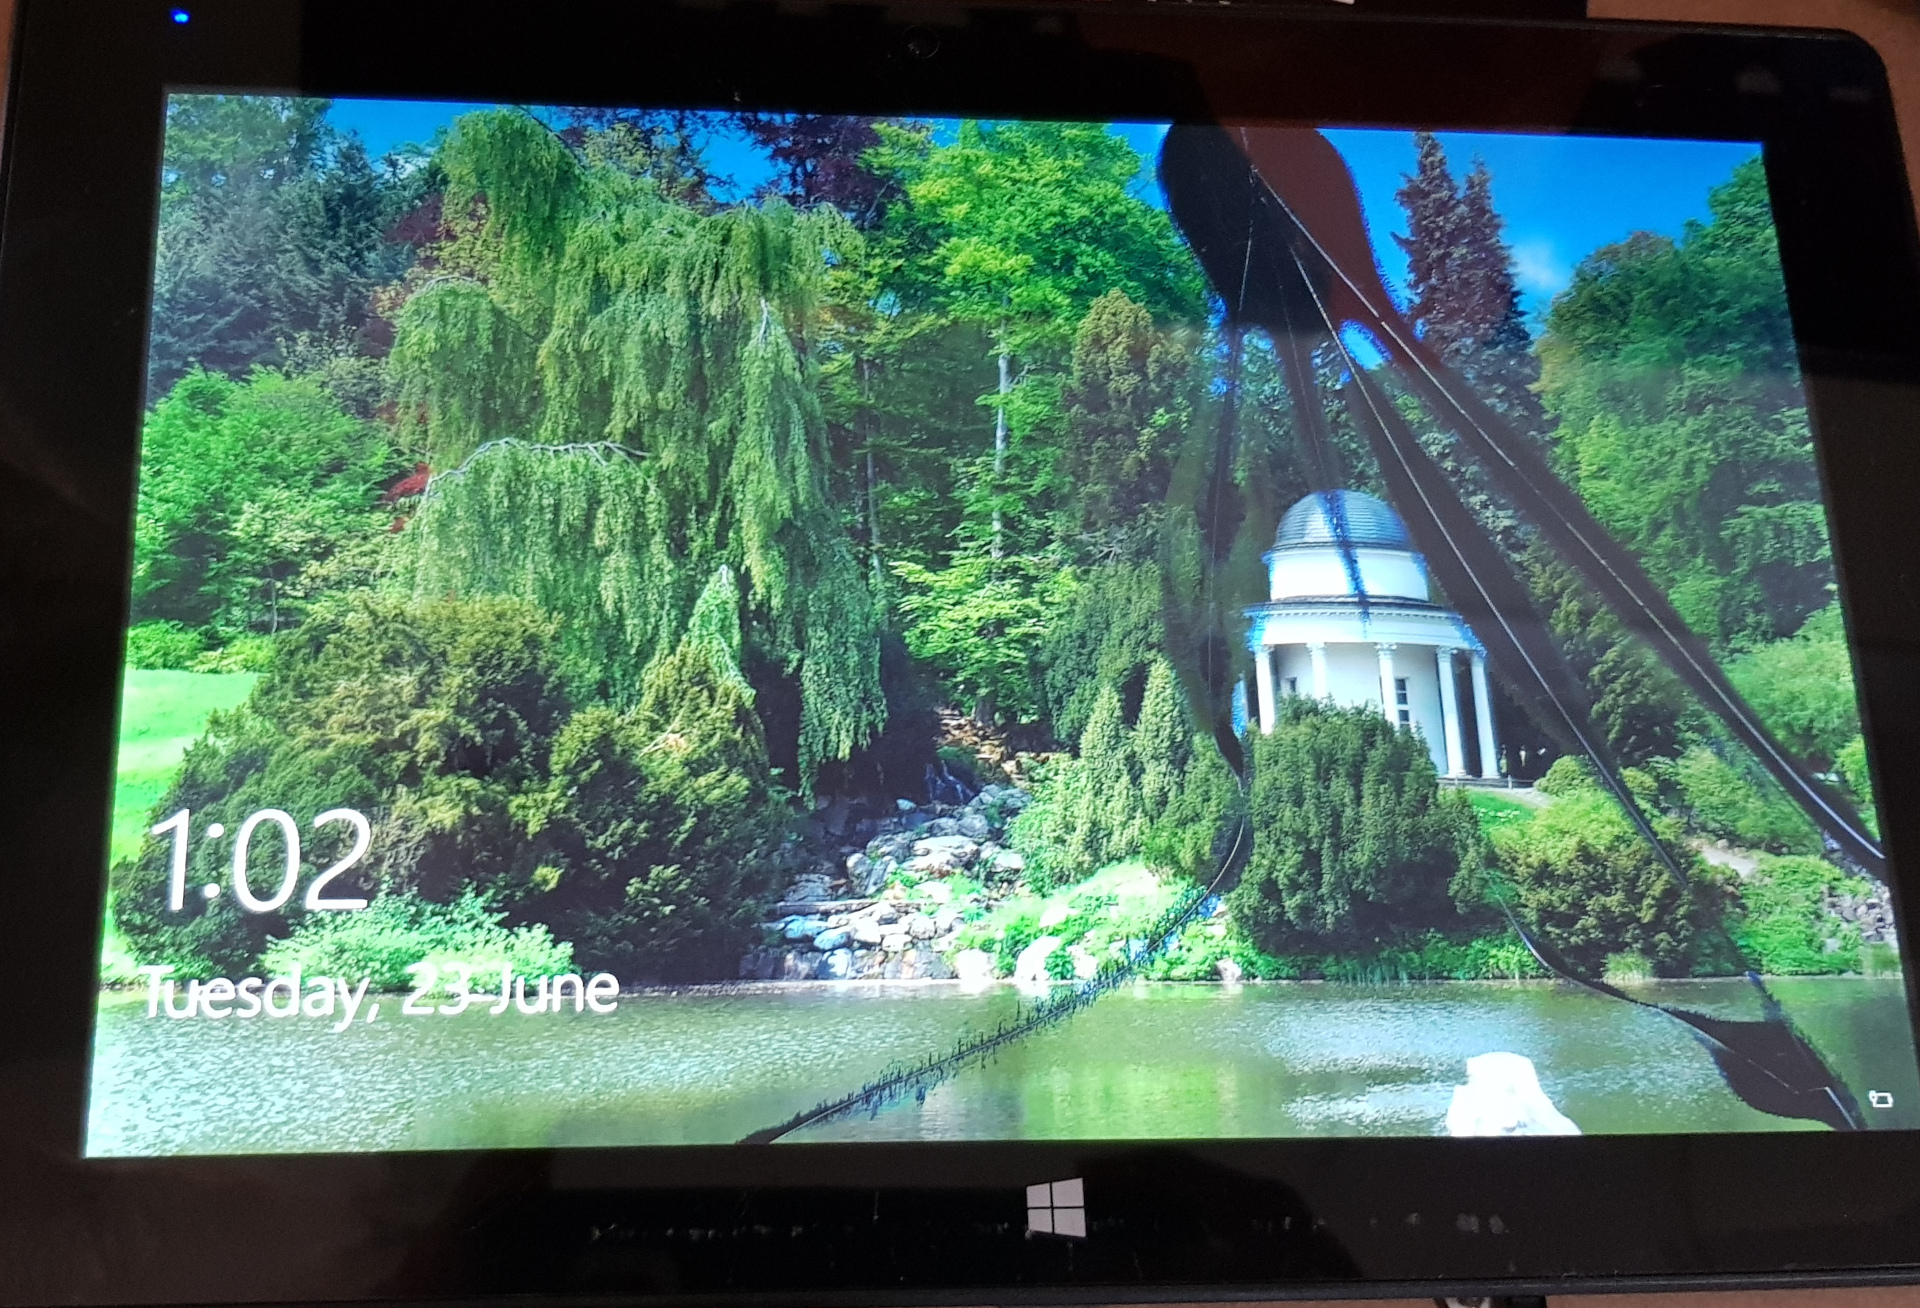 A windows tablet computer with a damaged screen. Cracks are visible and parts of the screen do not turn on.